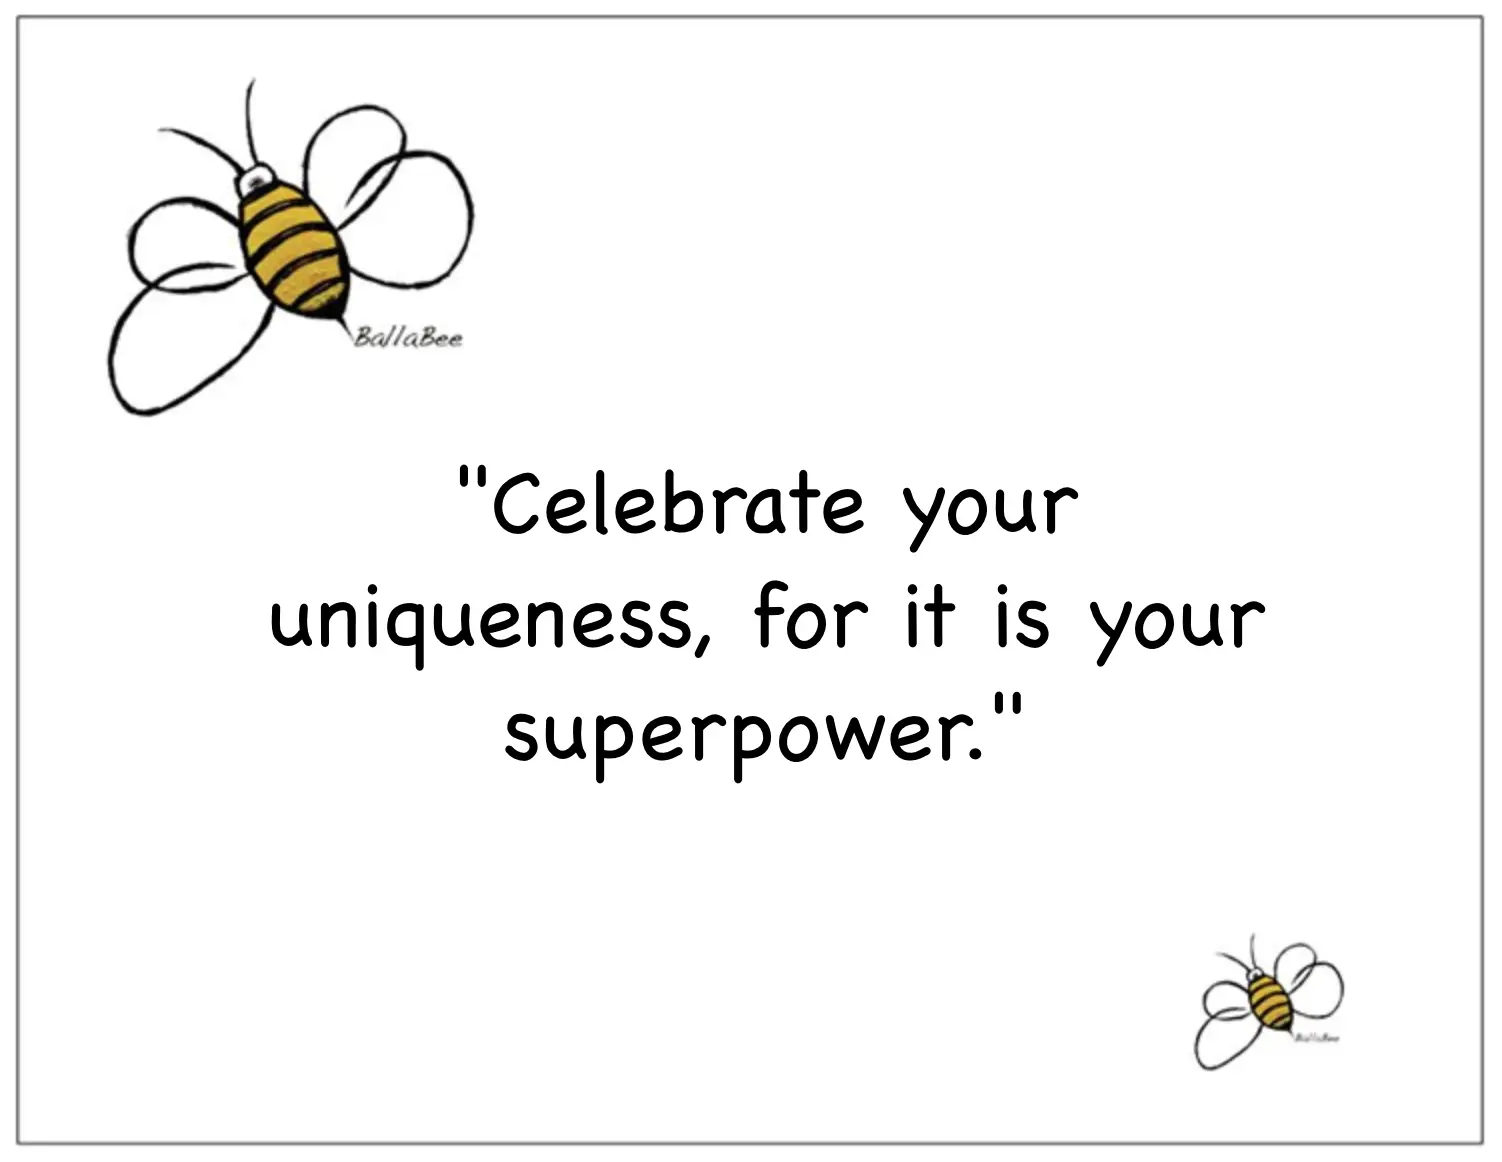 Celebrate your uniqueness, for it is your superpower